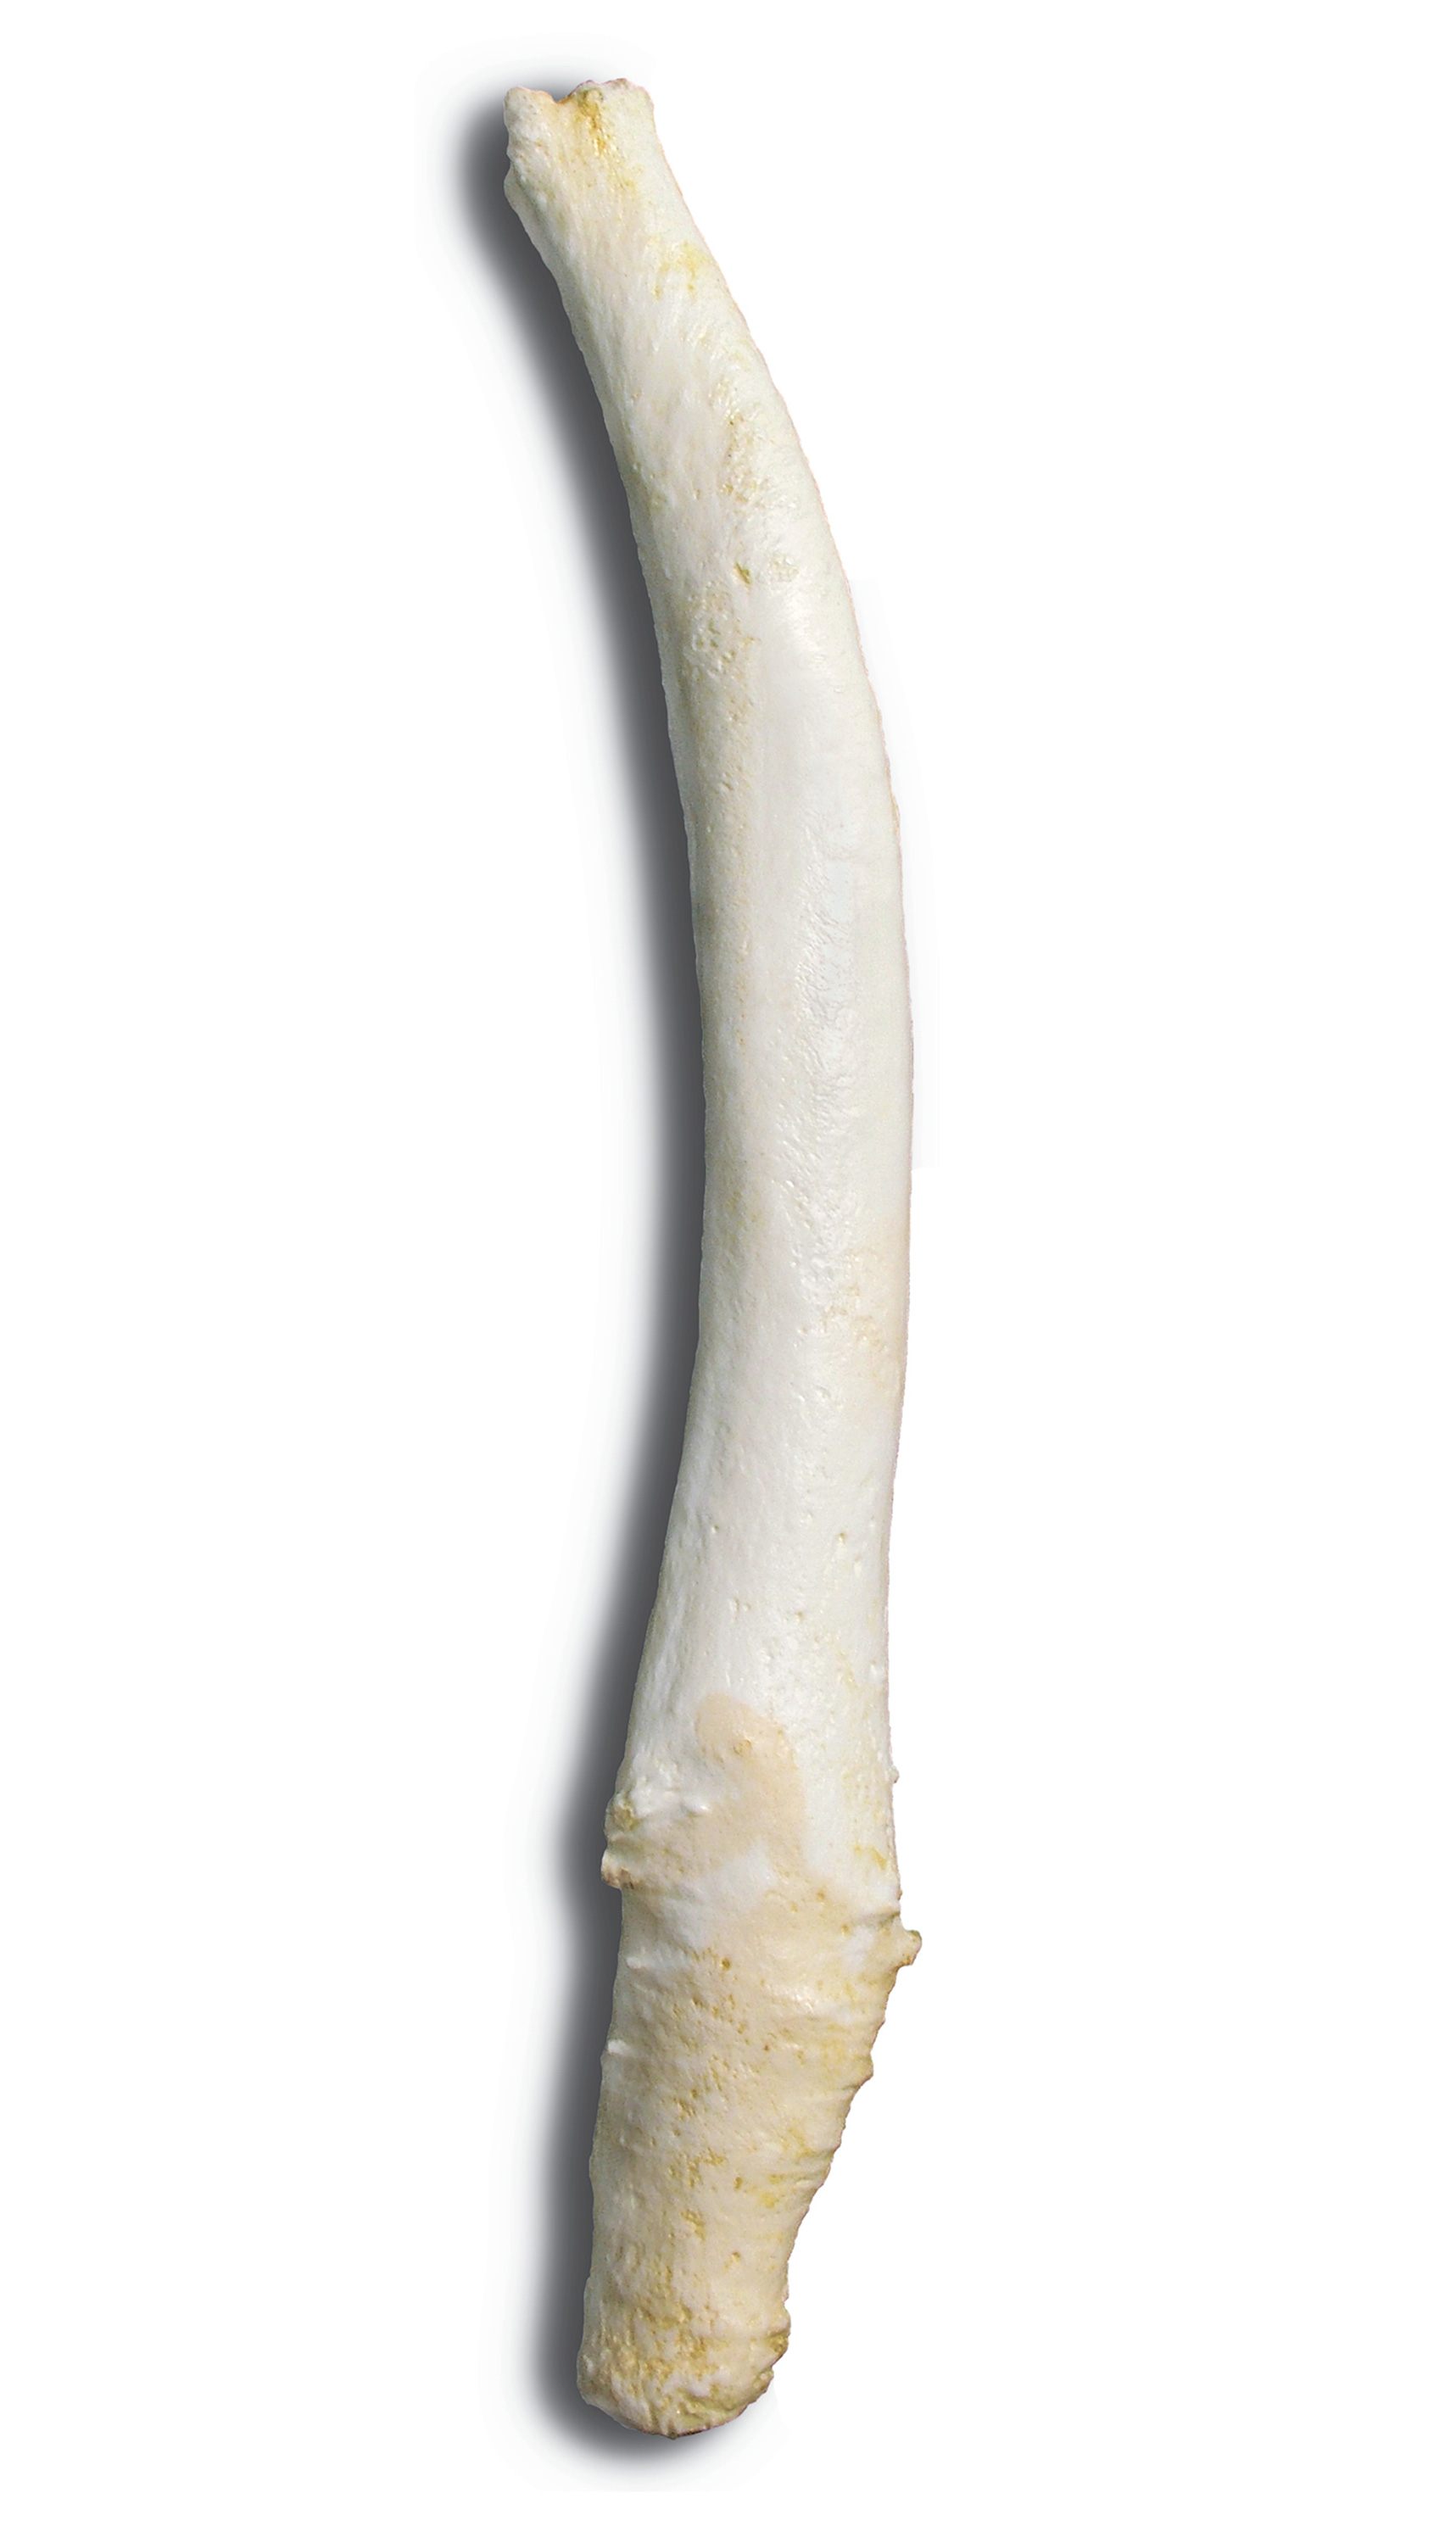 A photograph of the baculum of a gray seal. 